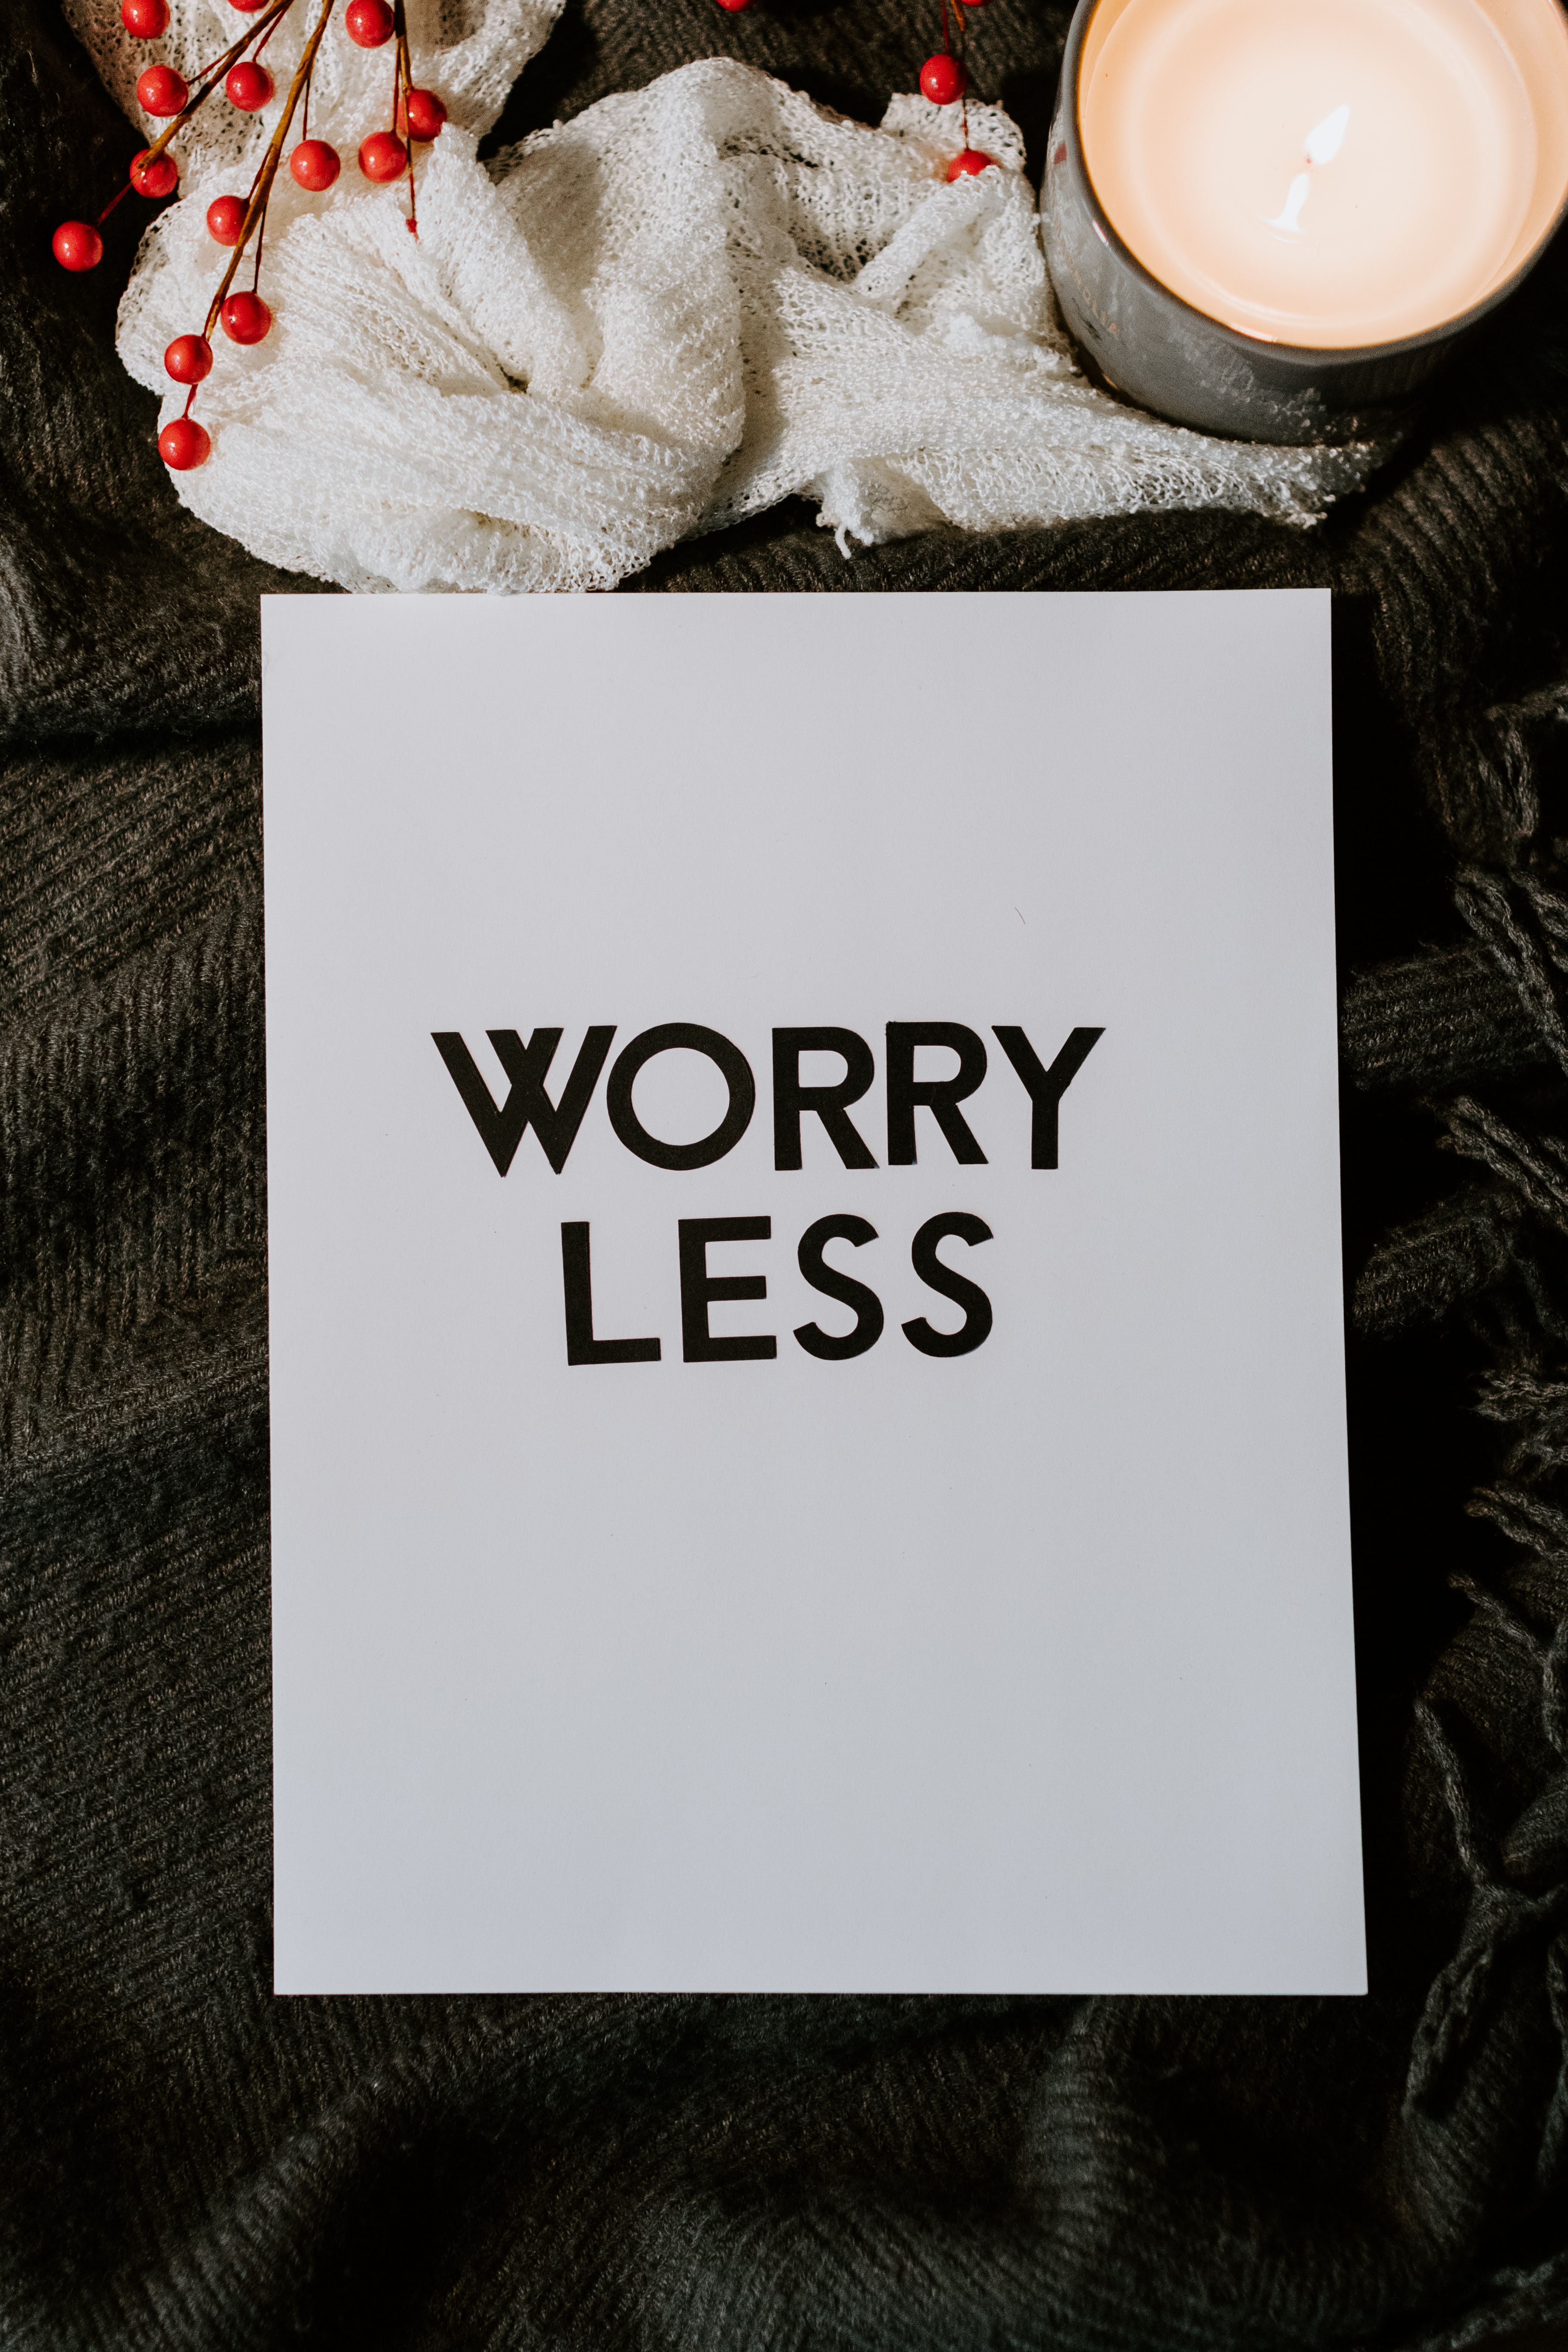 worry less printed on piece on paper